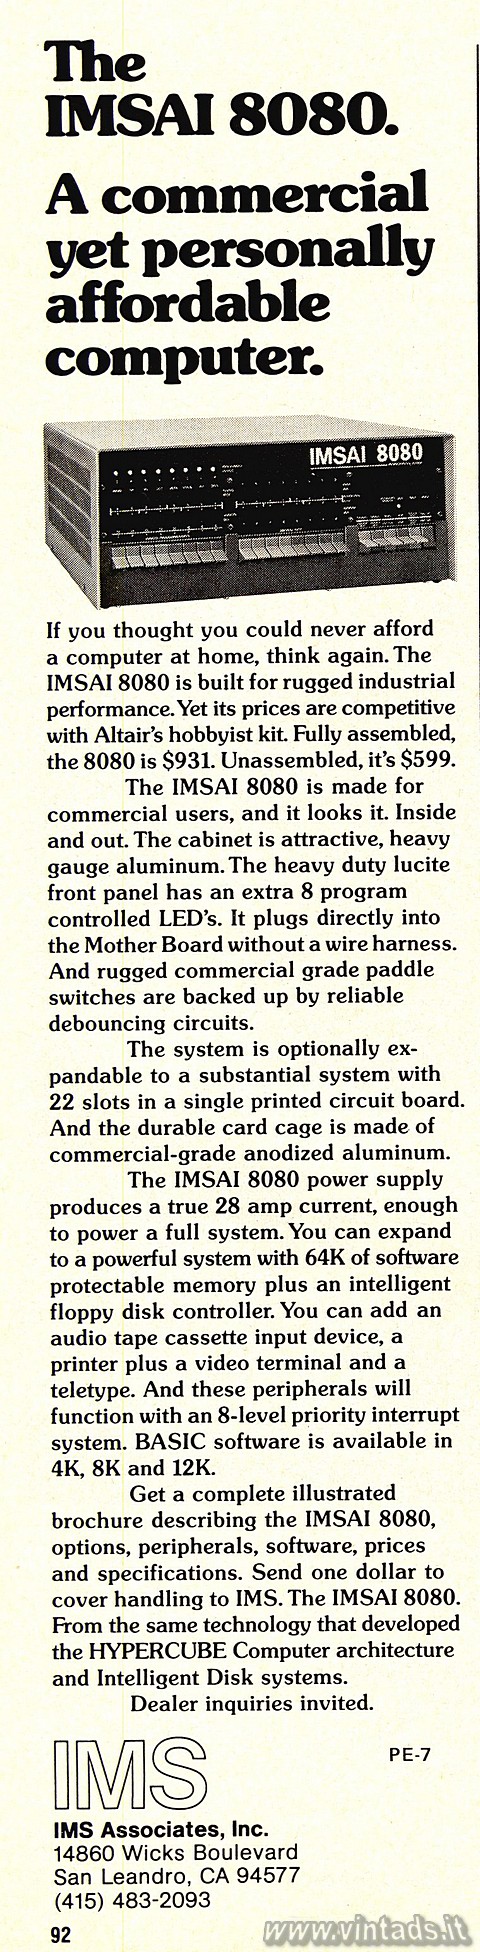 The IMSAI 8080. A commercial yet personally affordable computer.
If you thought